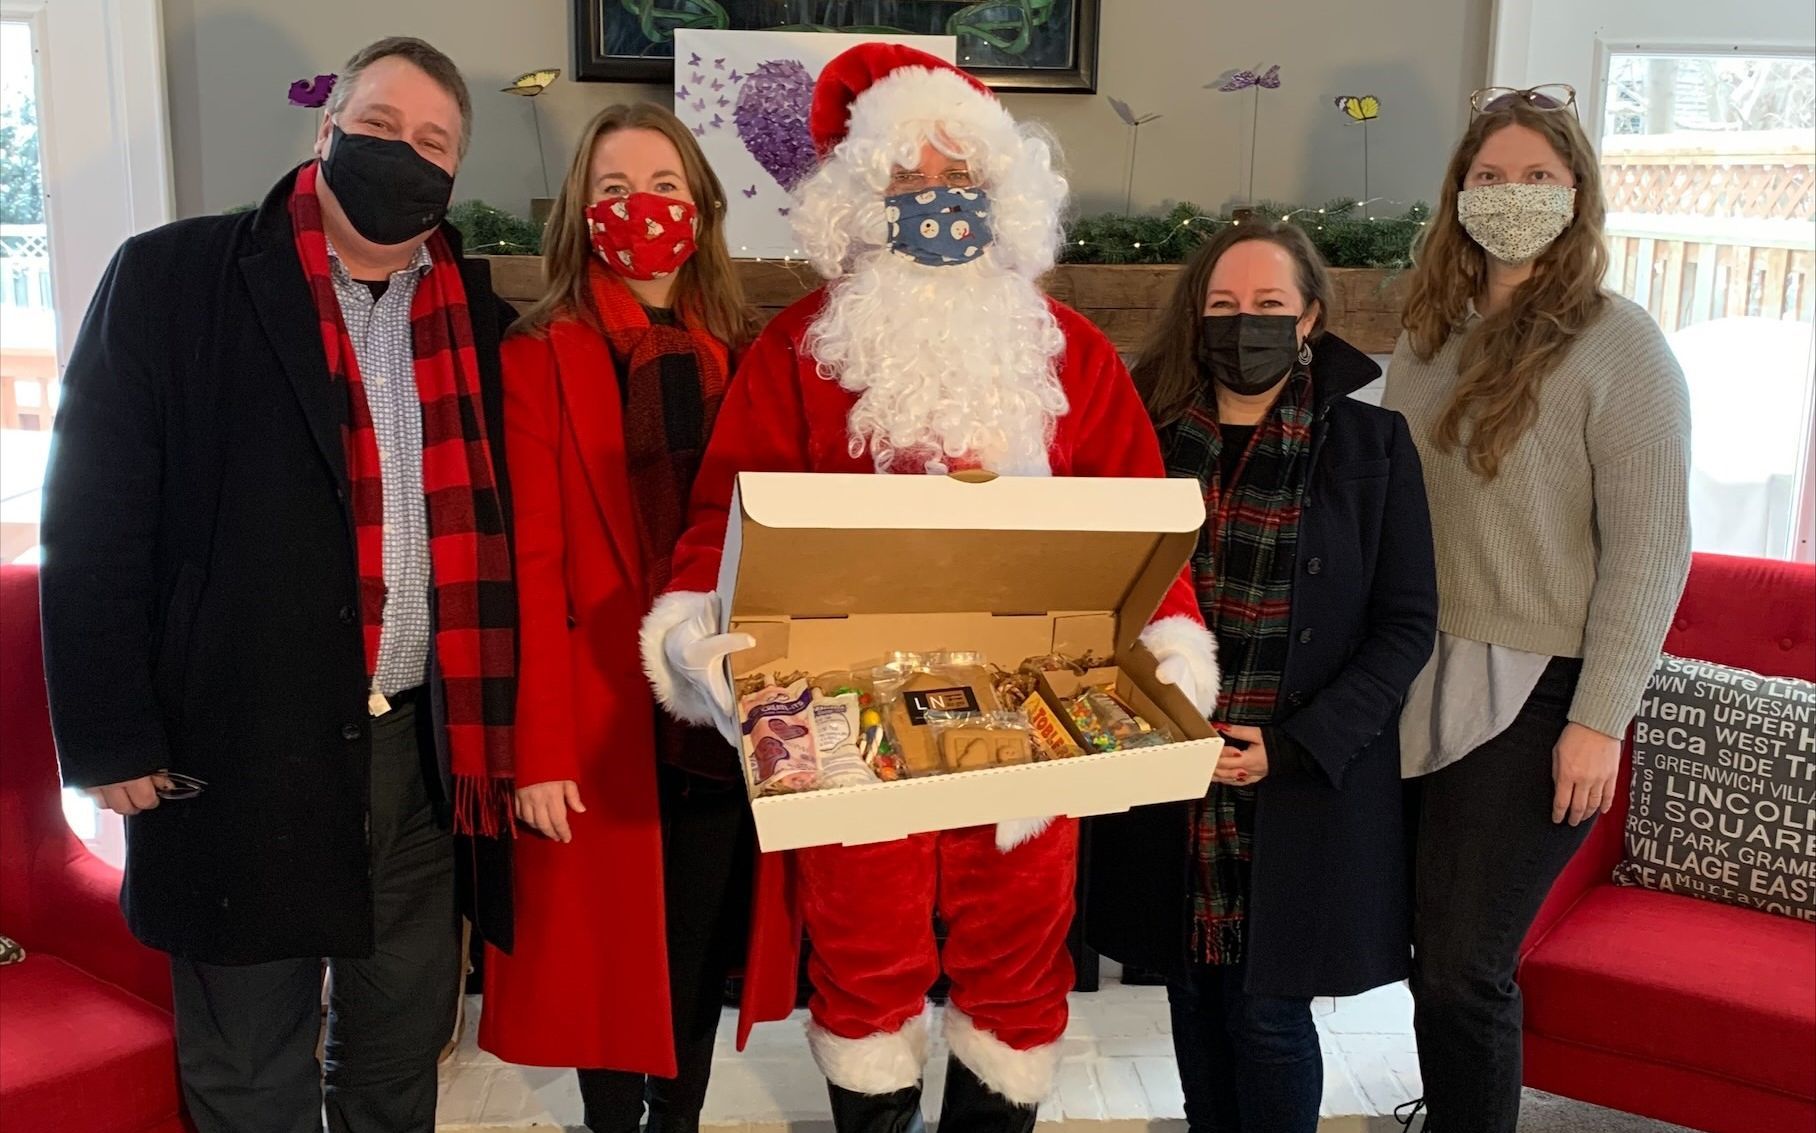 Oatley Vigmond Aims to Bring Holiday Cheer to Four Local Charities by Donating 120 Premium Gingerbread House Kits